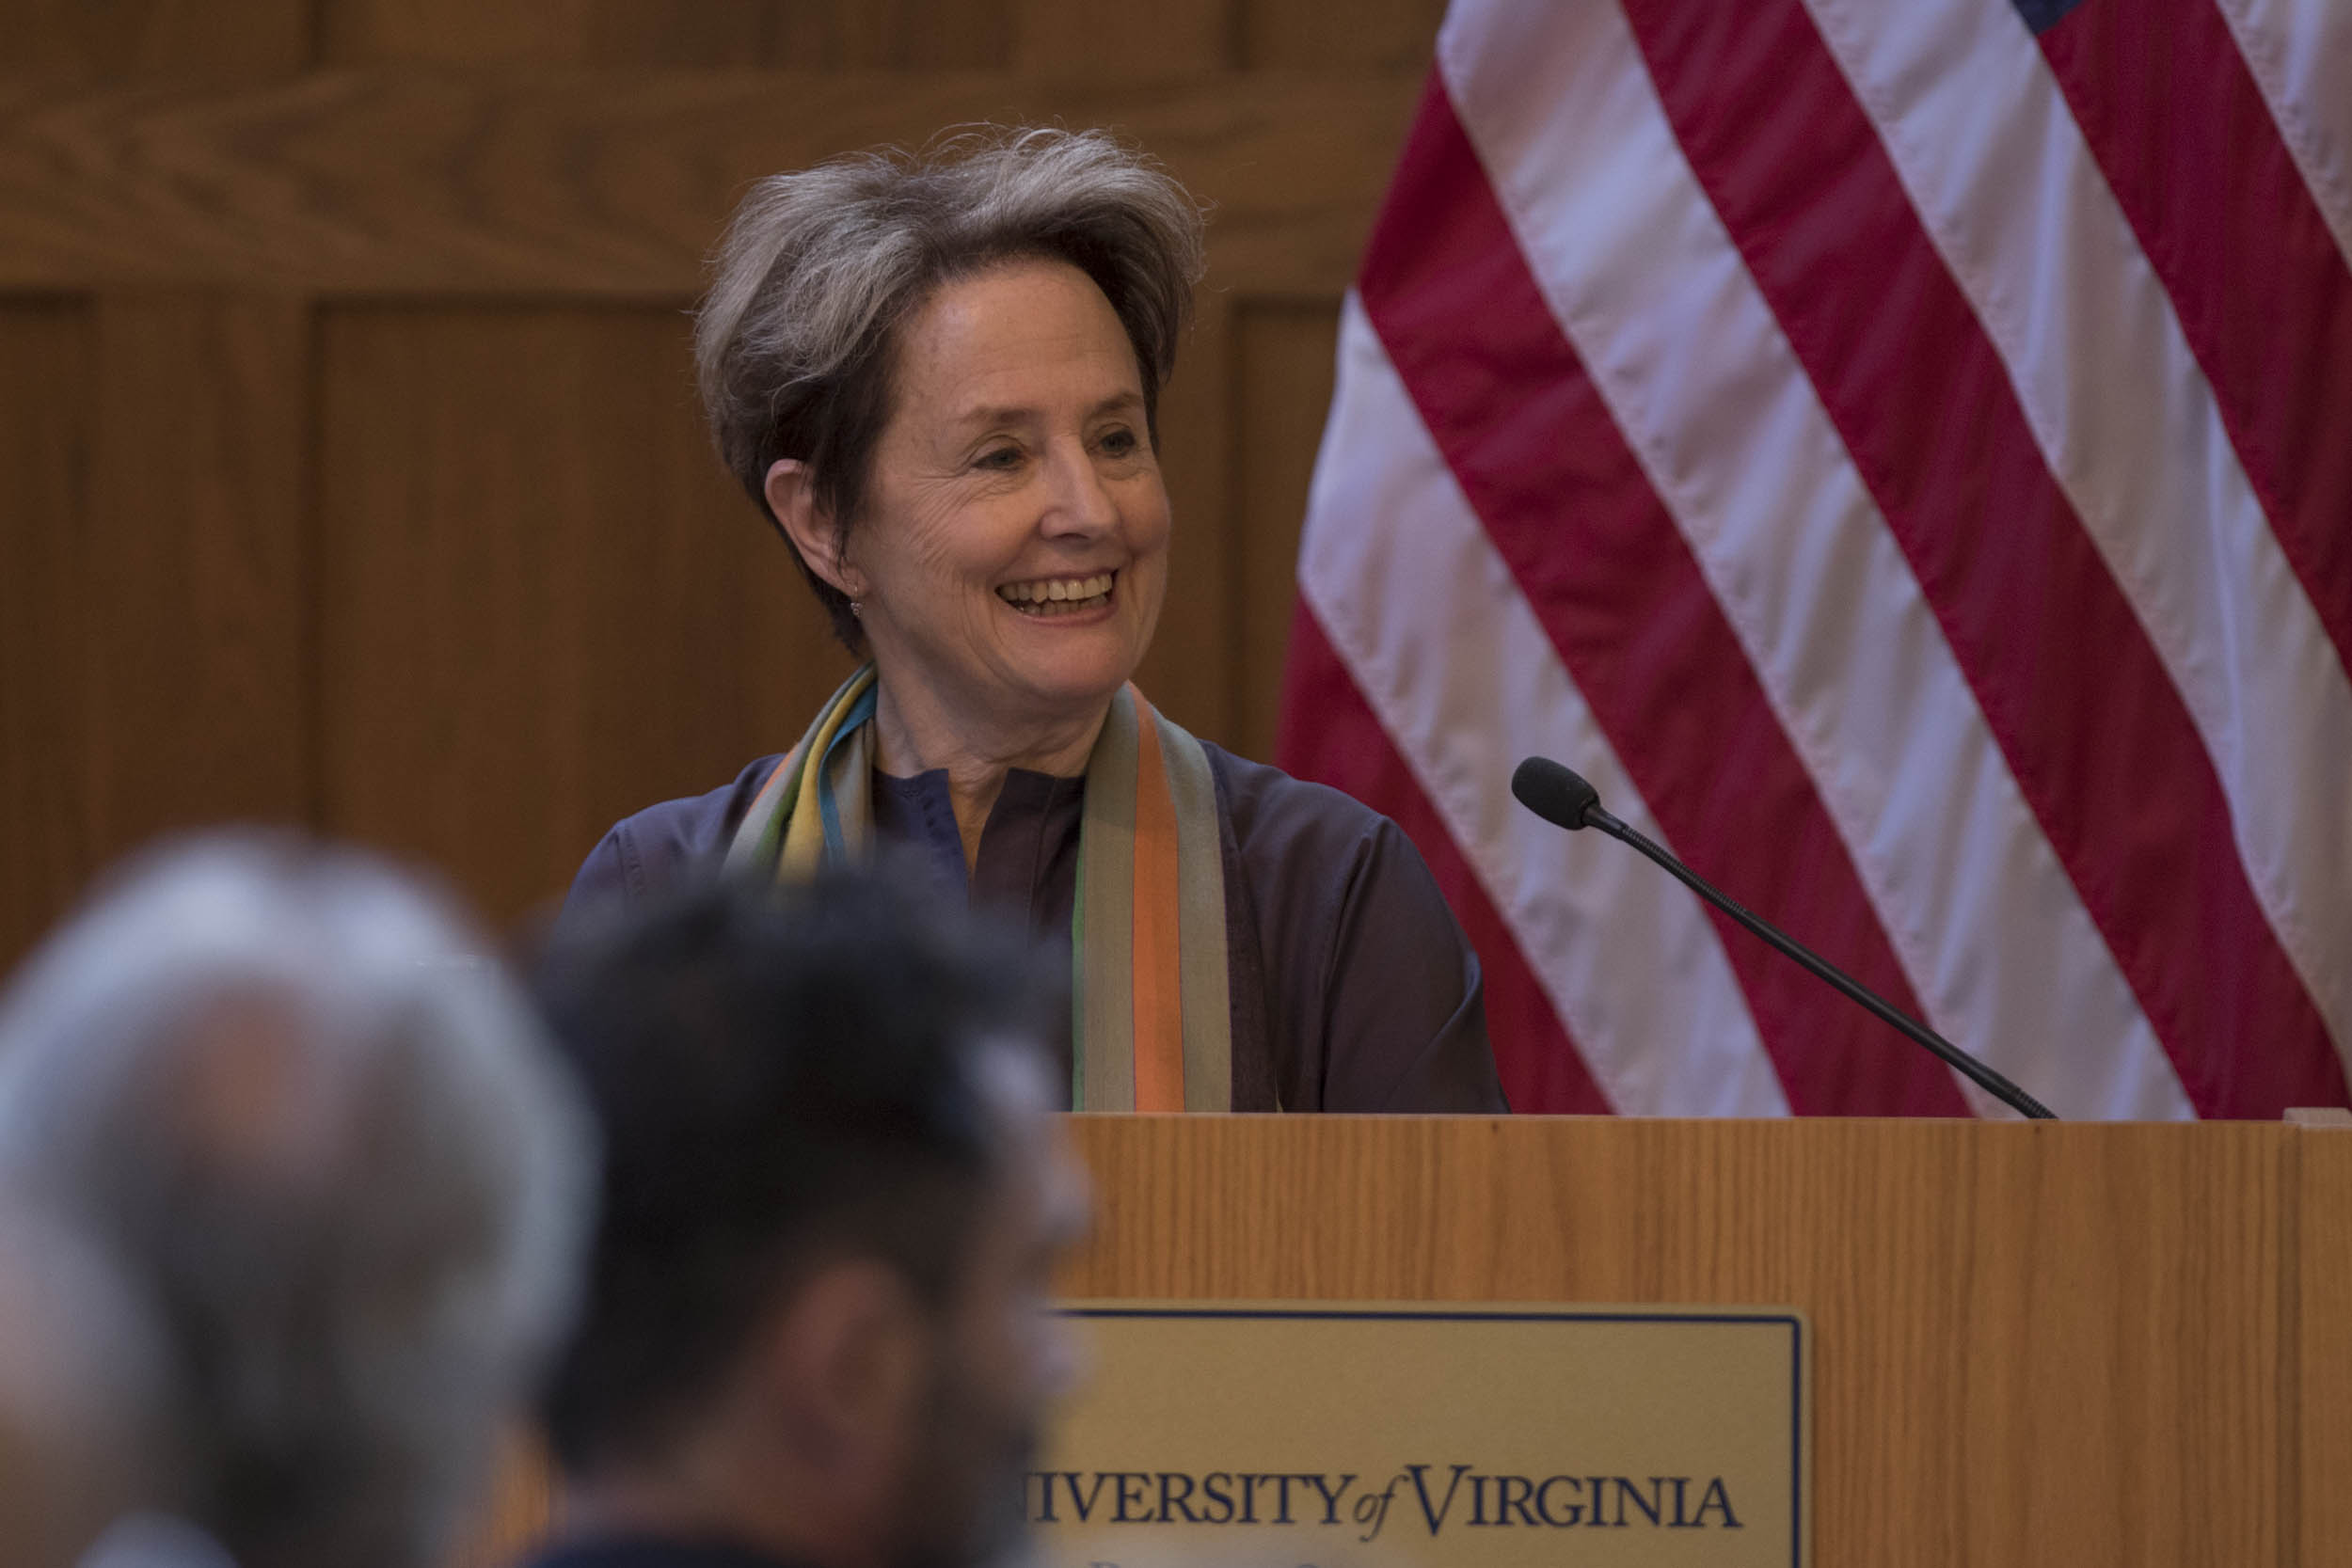 Alice Waters, recipient of the Thomas Jefferson Medal in Citizen Leadership, spoke Thursday at the Batten School. (Photo by Sanjay Suchak, University Communications) 